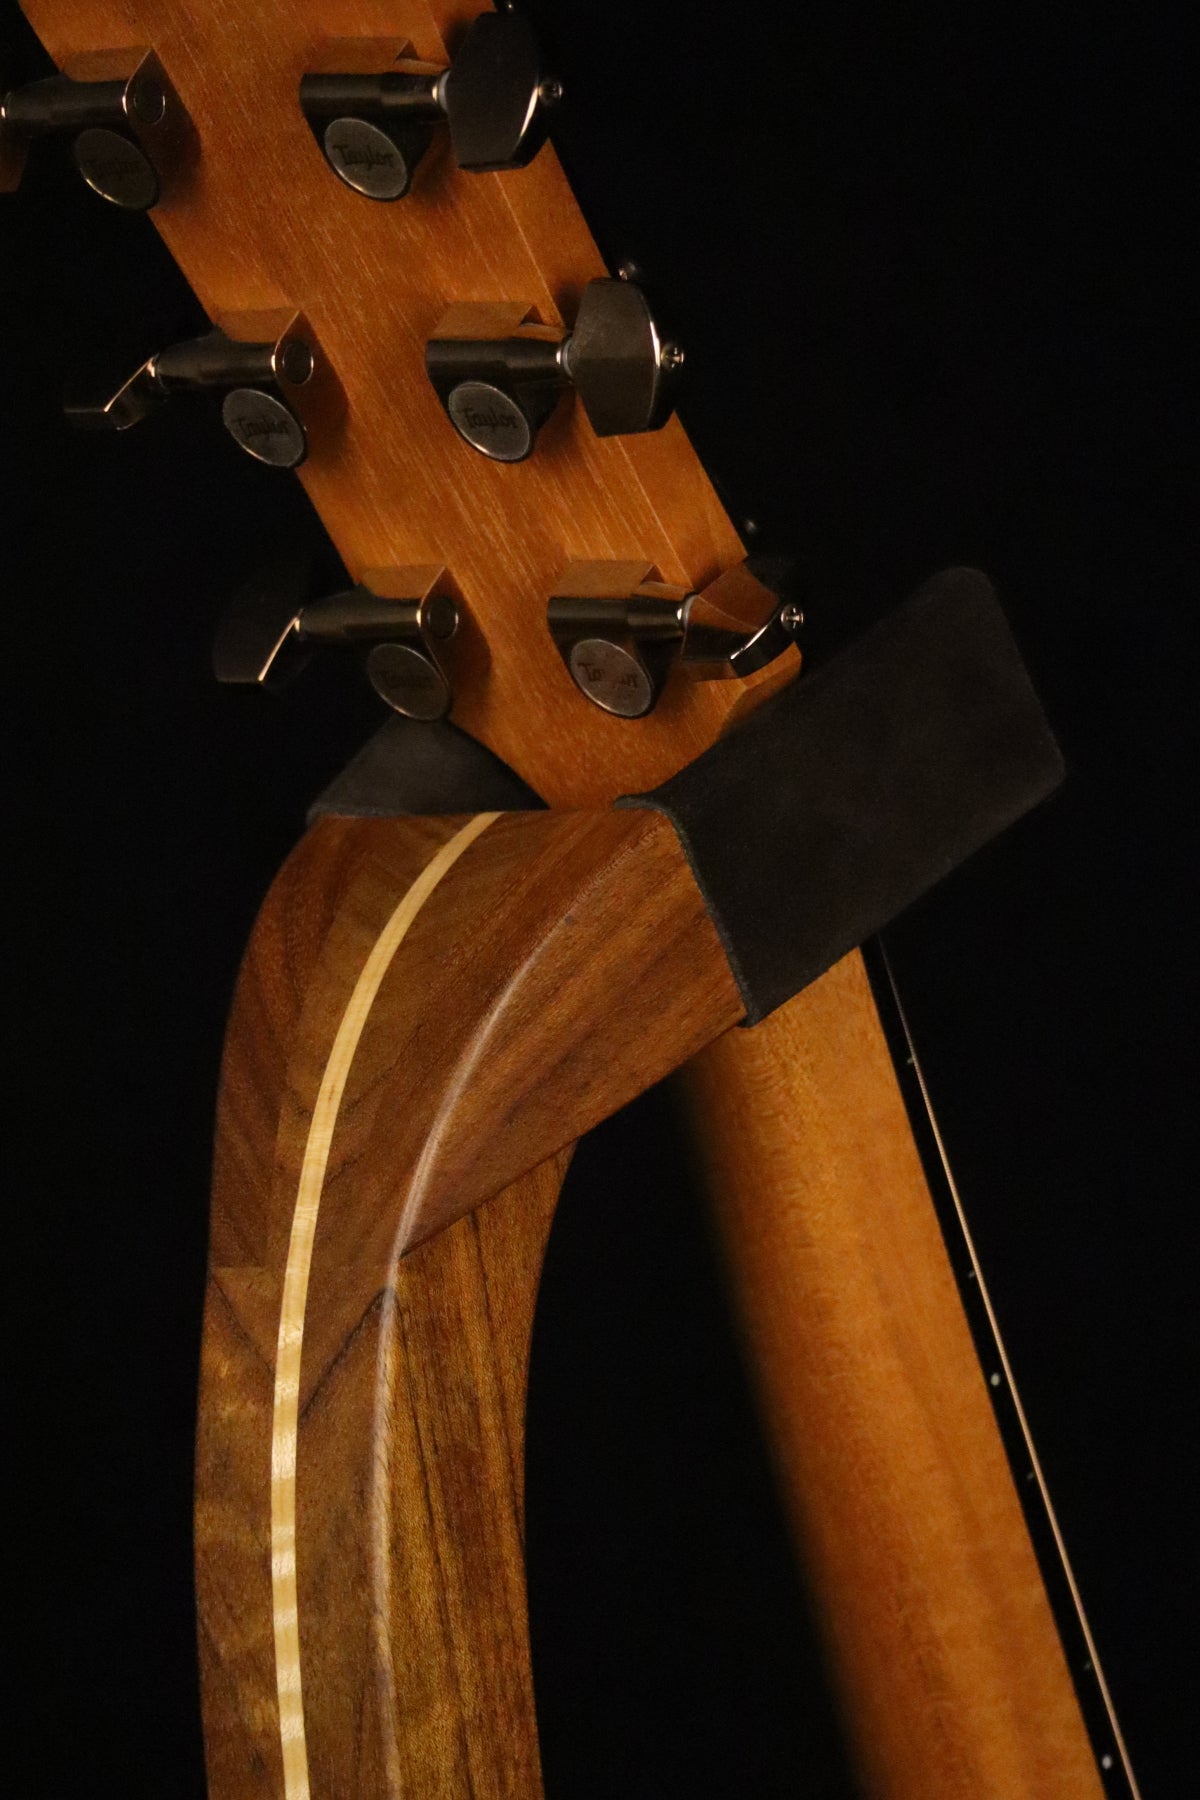 Folding sheuda ovangkol and curly maple wood guitar stand yoke detail image with Taylor guitar